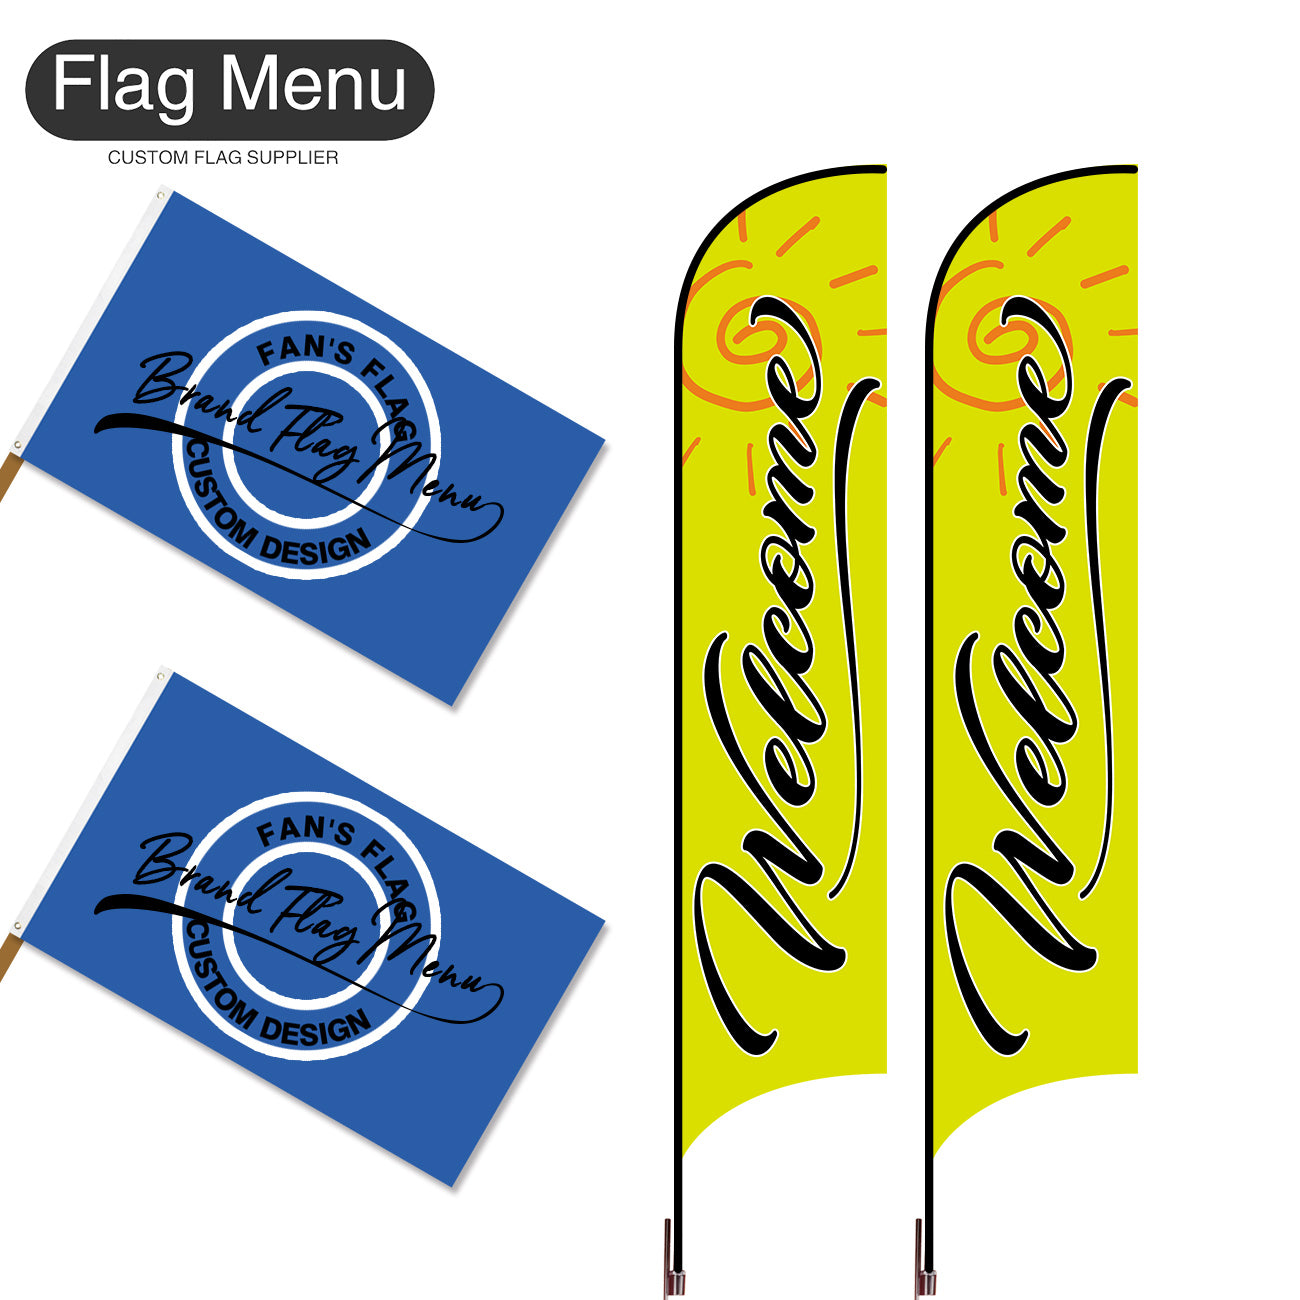 Outdoor Advertising Set - D-Green A-S - Feather Flag -Double Sided & 3'x5' Regular Flag -Single Sided-Cross & Water Bag-Flag Menu